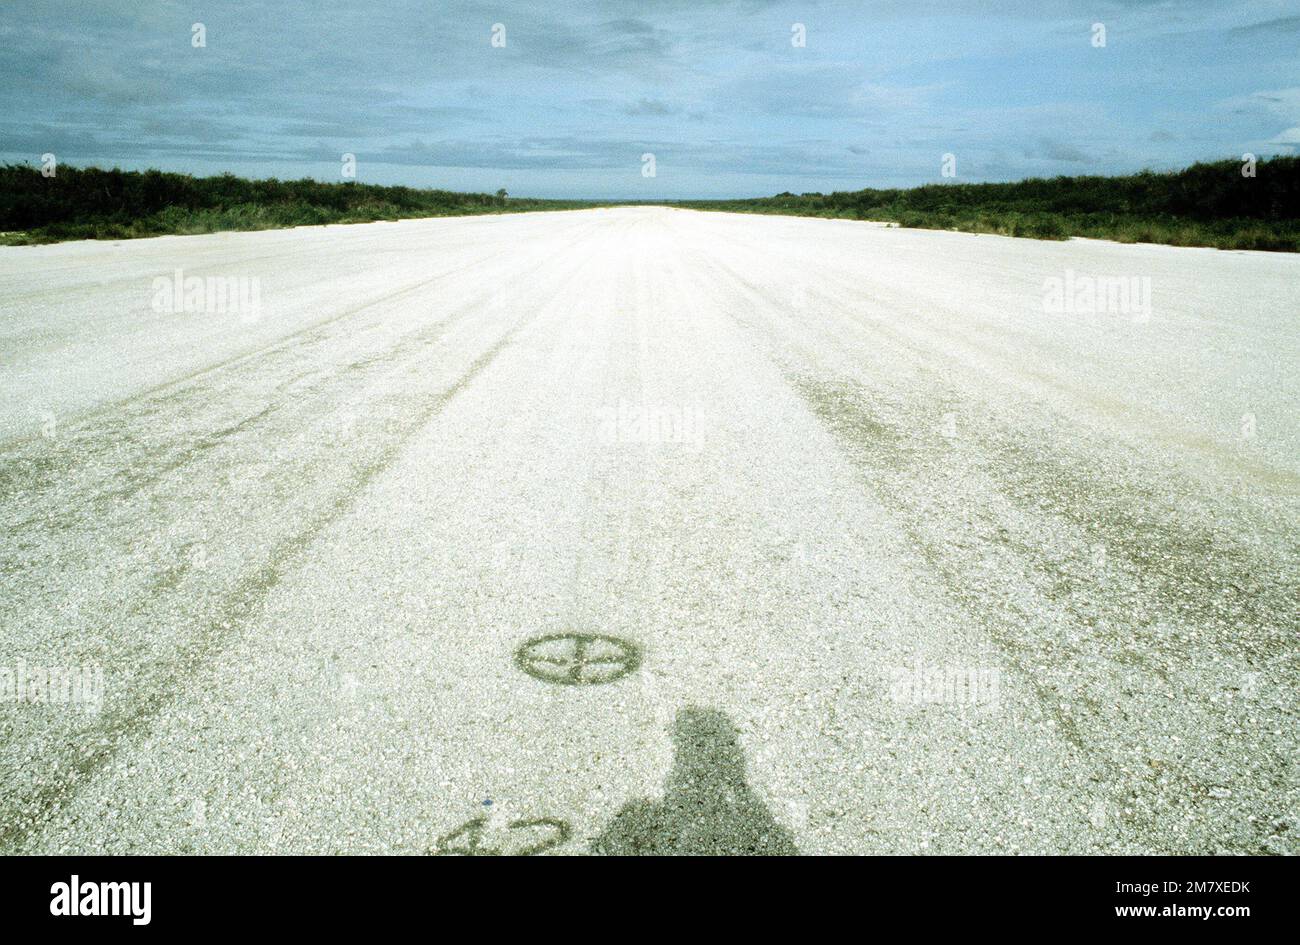 A view of the North Field prime runway from the 4,200 feet marker pointing east, during Exercise Kennel Bear '4-82. This airfield was primarily used during World War II. Subject Operation/Series: KENNEL BEAR '4-82 Base: Tinian Island Country: Northern Mariana Islands (MNP) Stock Photo